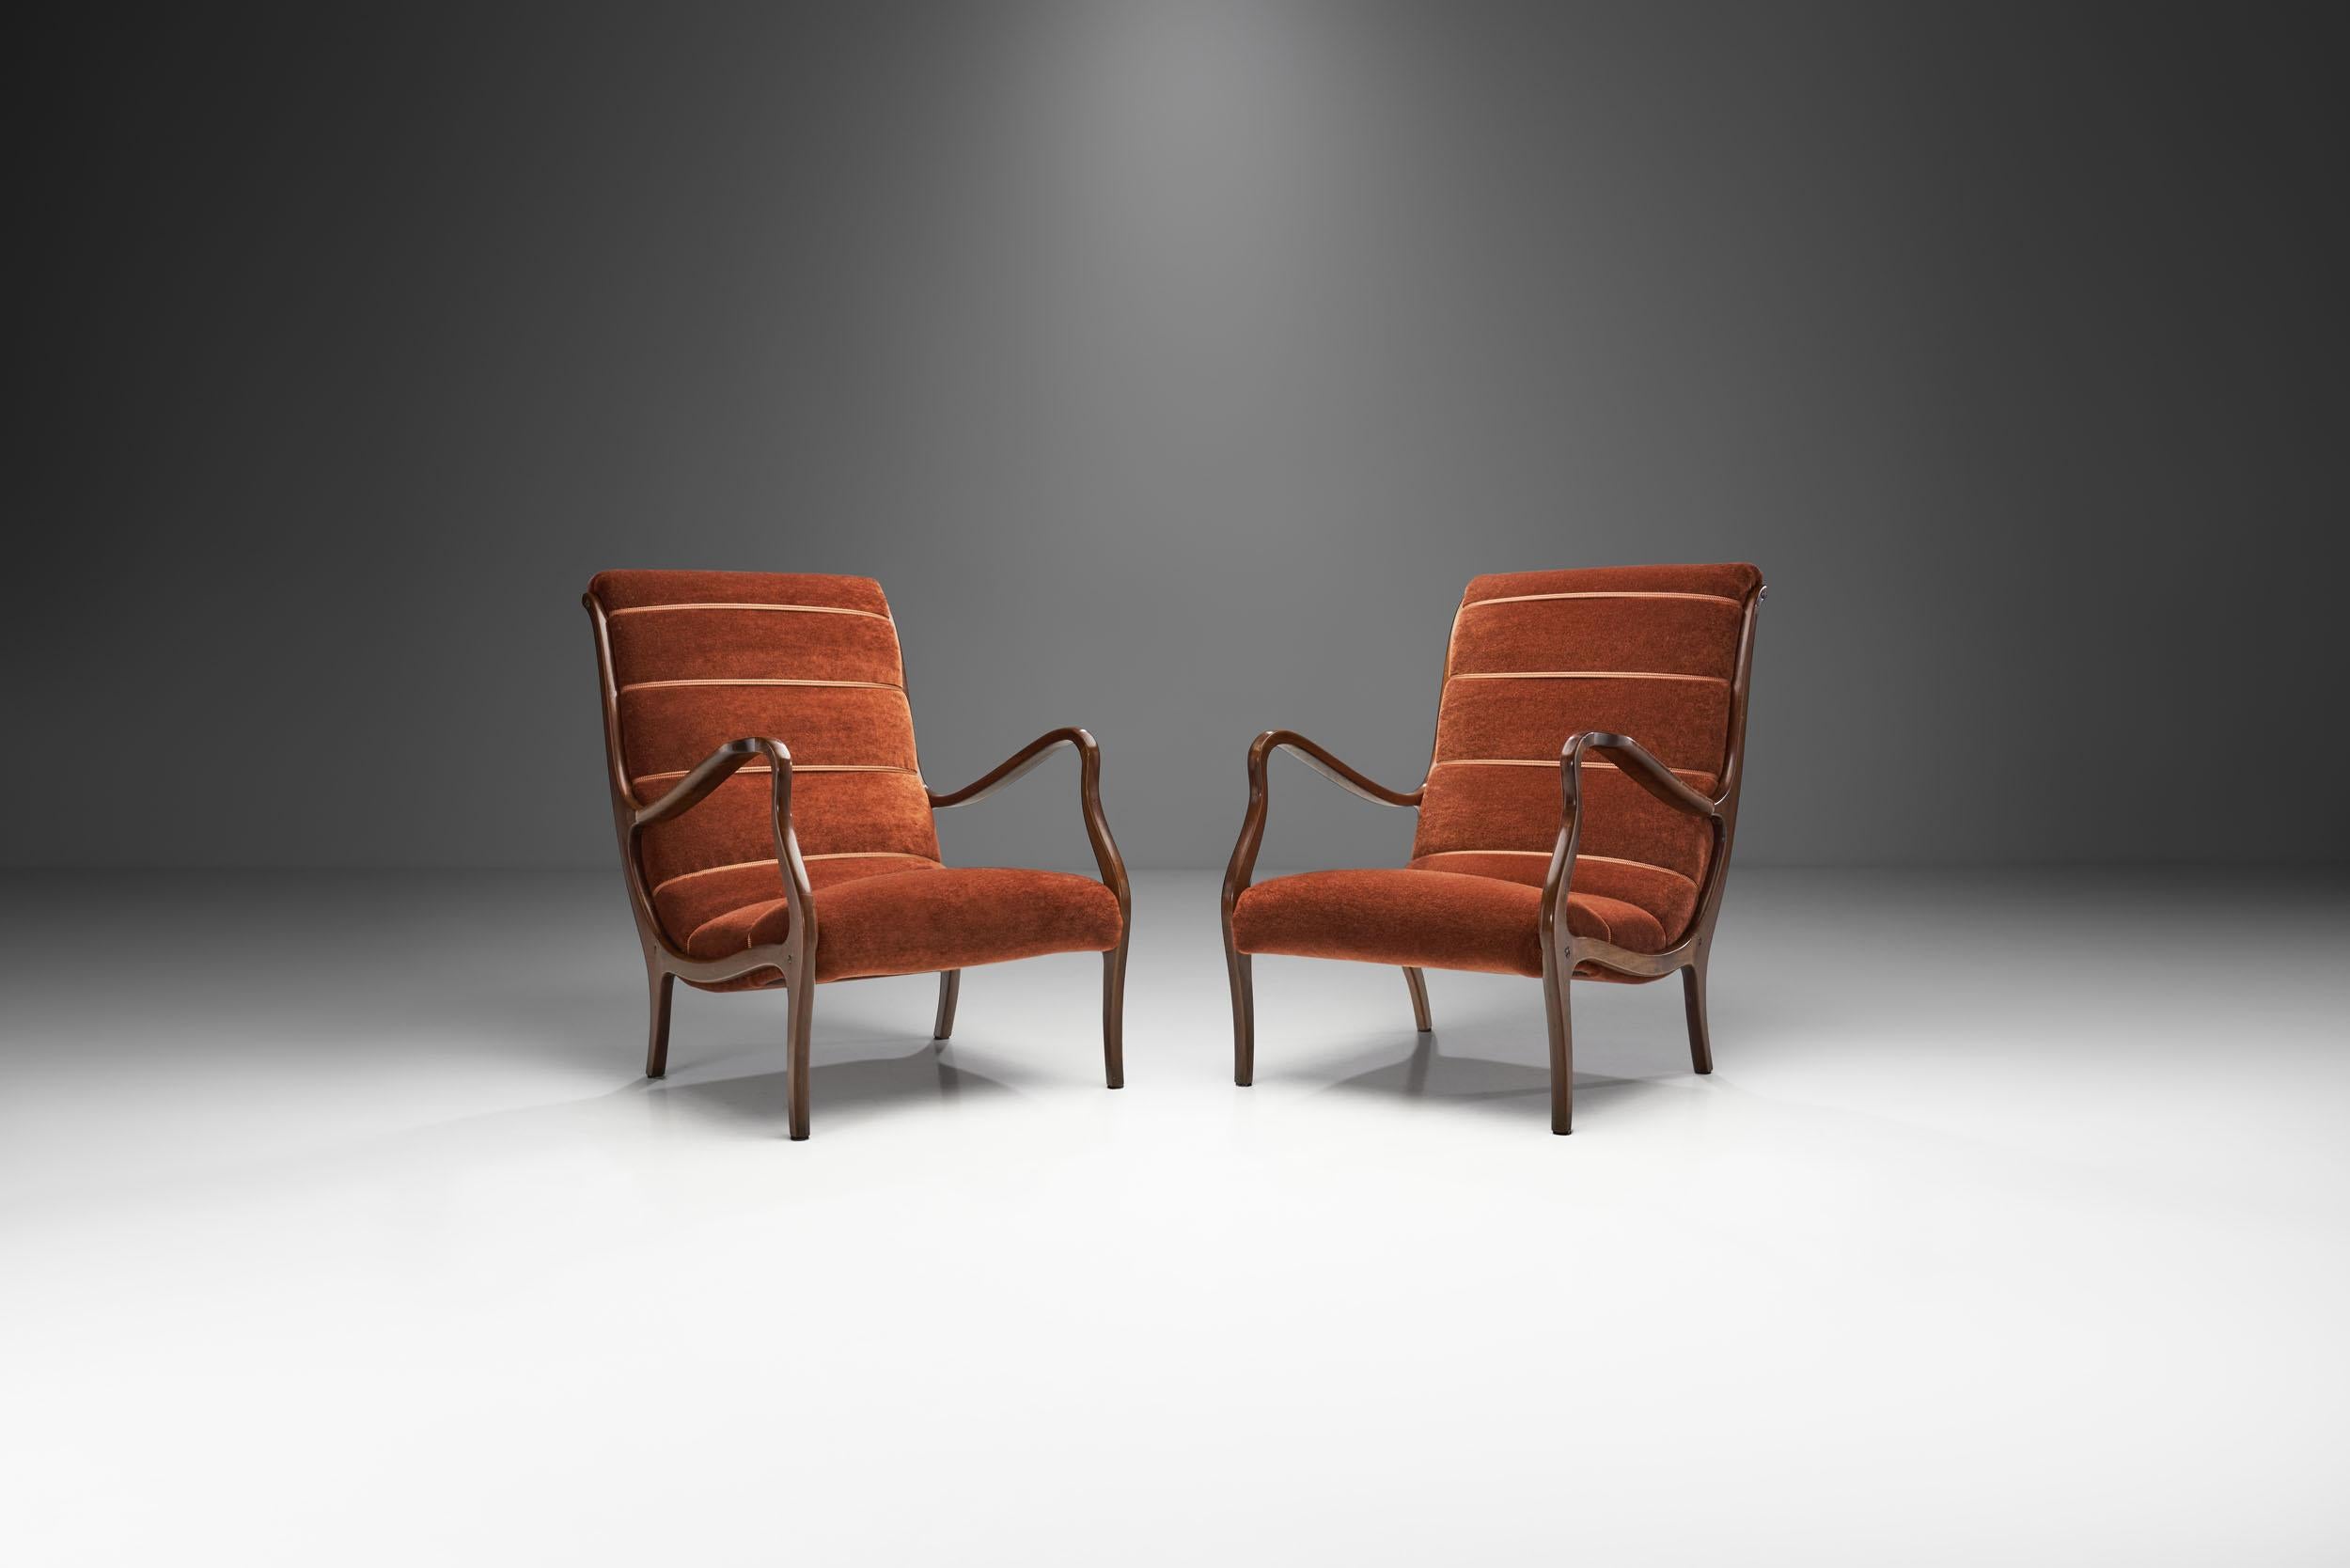 Like the 1958 Mitzi armchair, this model belongs to the most well-known chair designs of Italian designer, Ezio Longhi. This pair of lounge chairs takes one back to post-war Italy, when the now world-famous free form designs of the 1950s and 60s